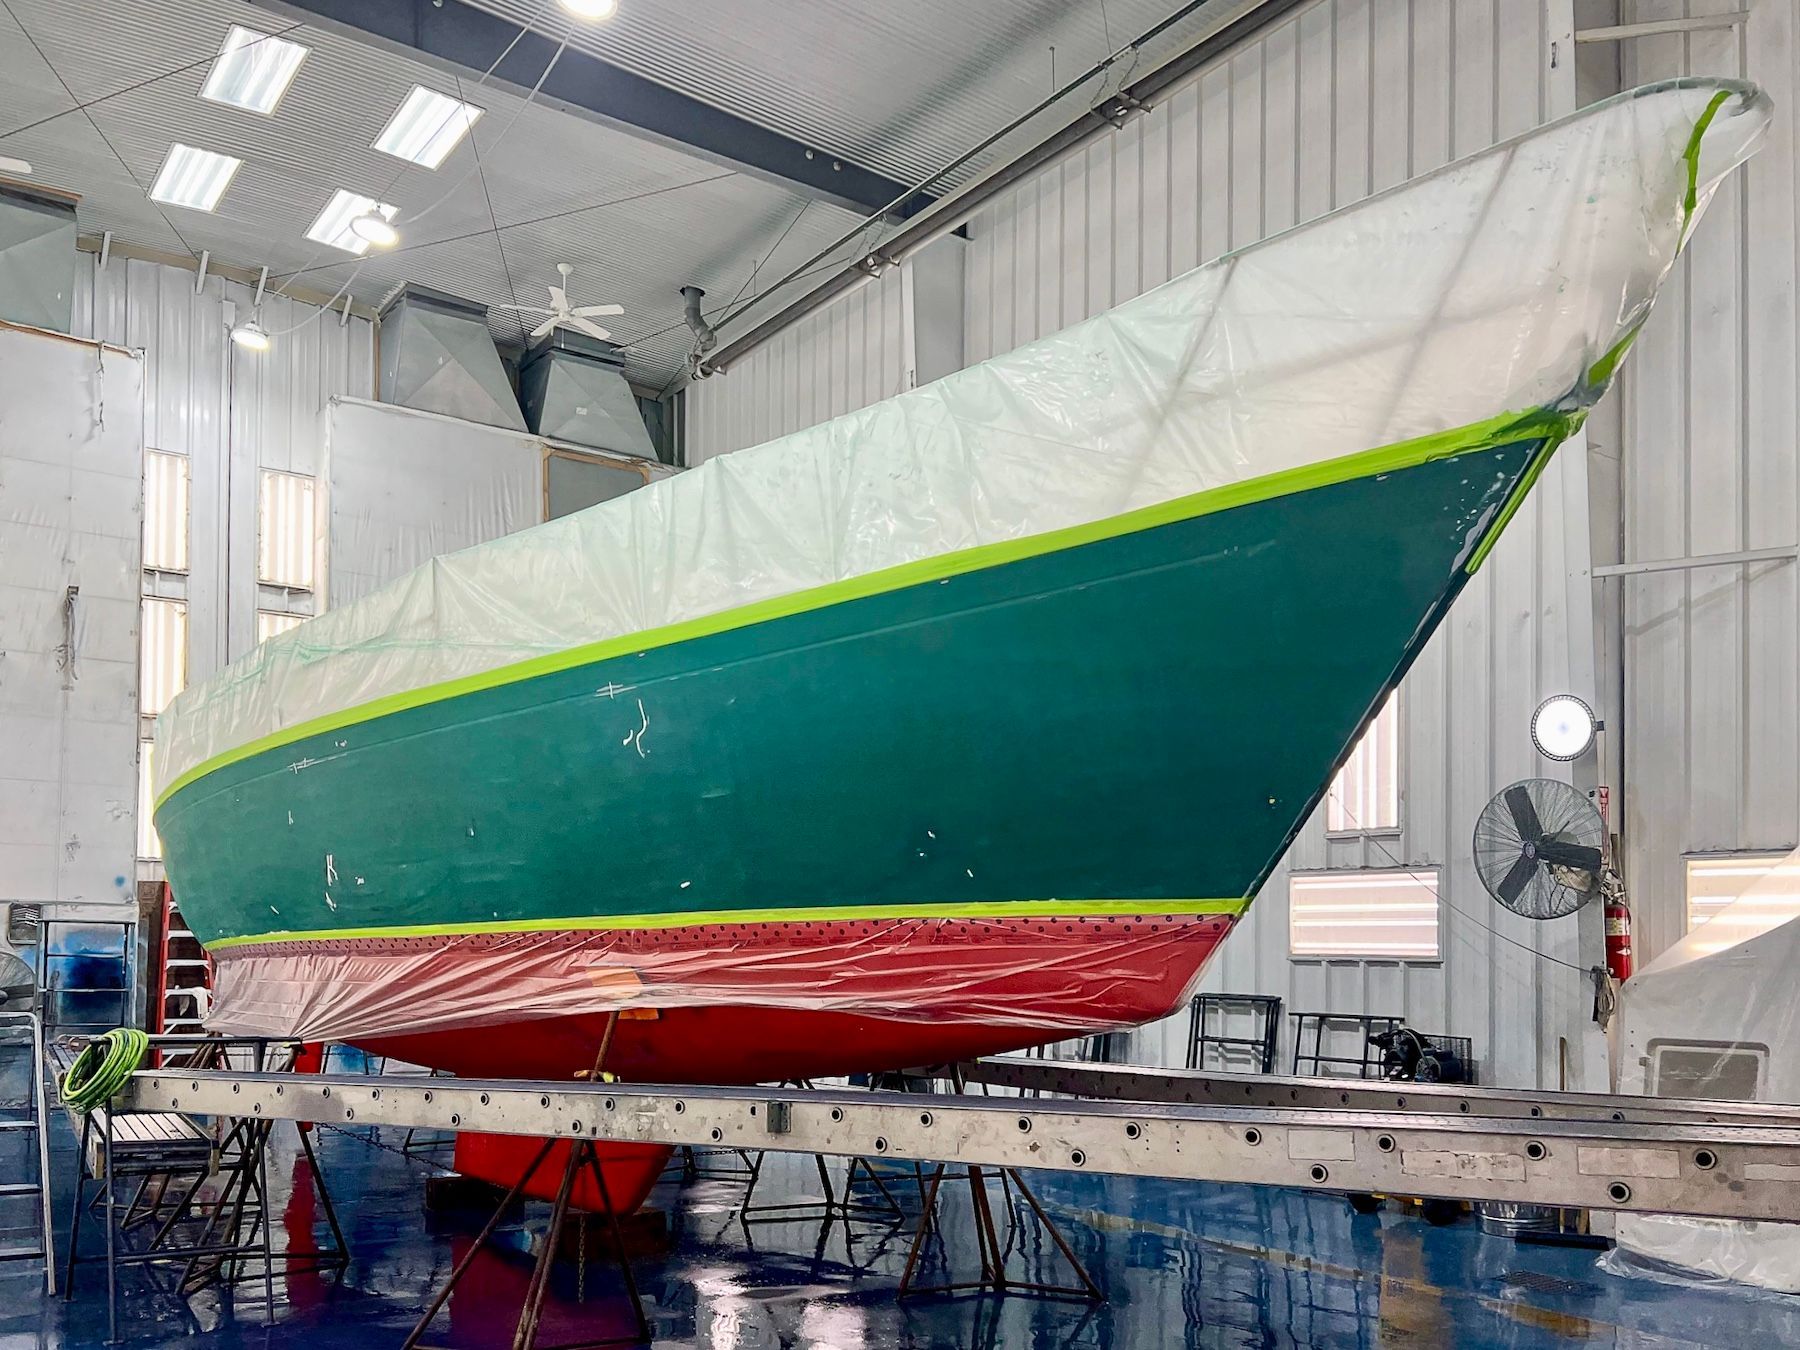 Boat in paint shop with green hull